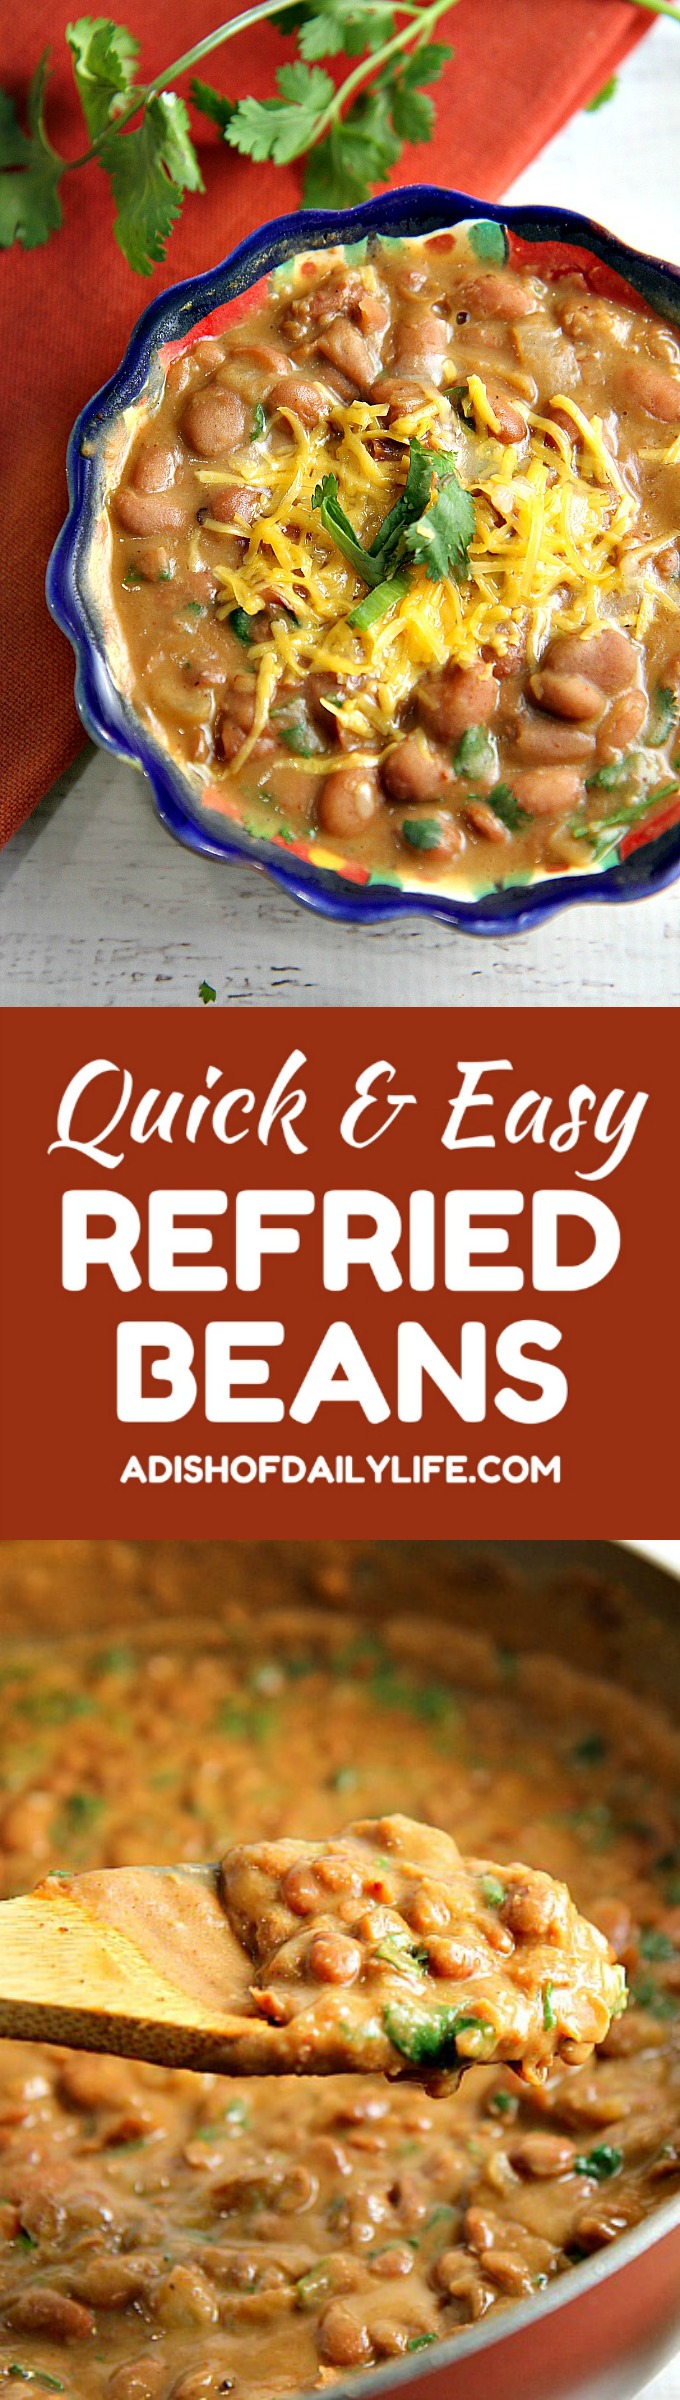 You'll never eat refried beans from a can again after trying this easy homemade refried beans recipe! They only take 15 minutes to make, and they're so versatile...use them as a side dish, as a base for burritos, or in layered bean dip or loaded nachos as well!